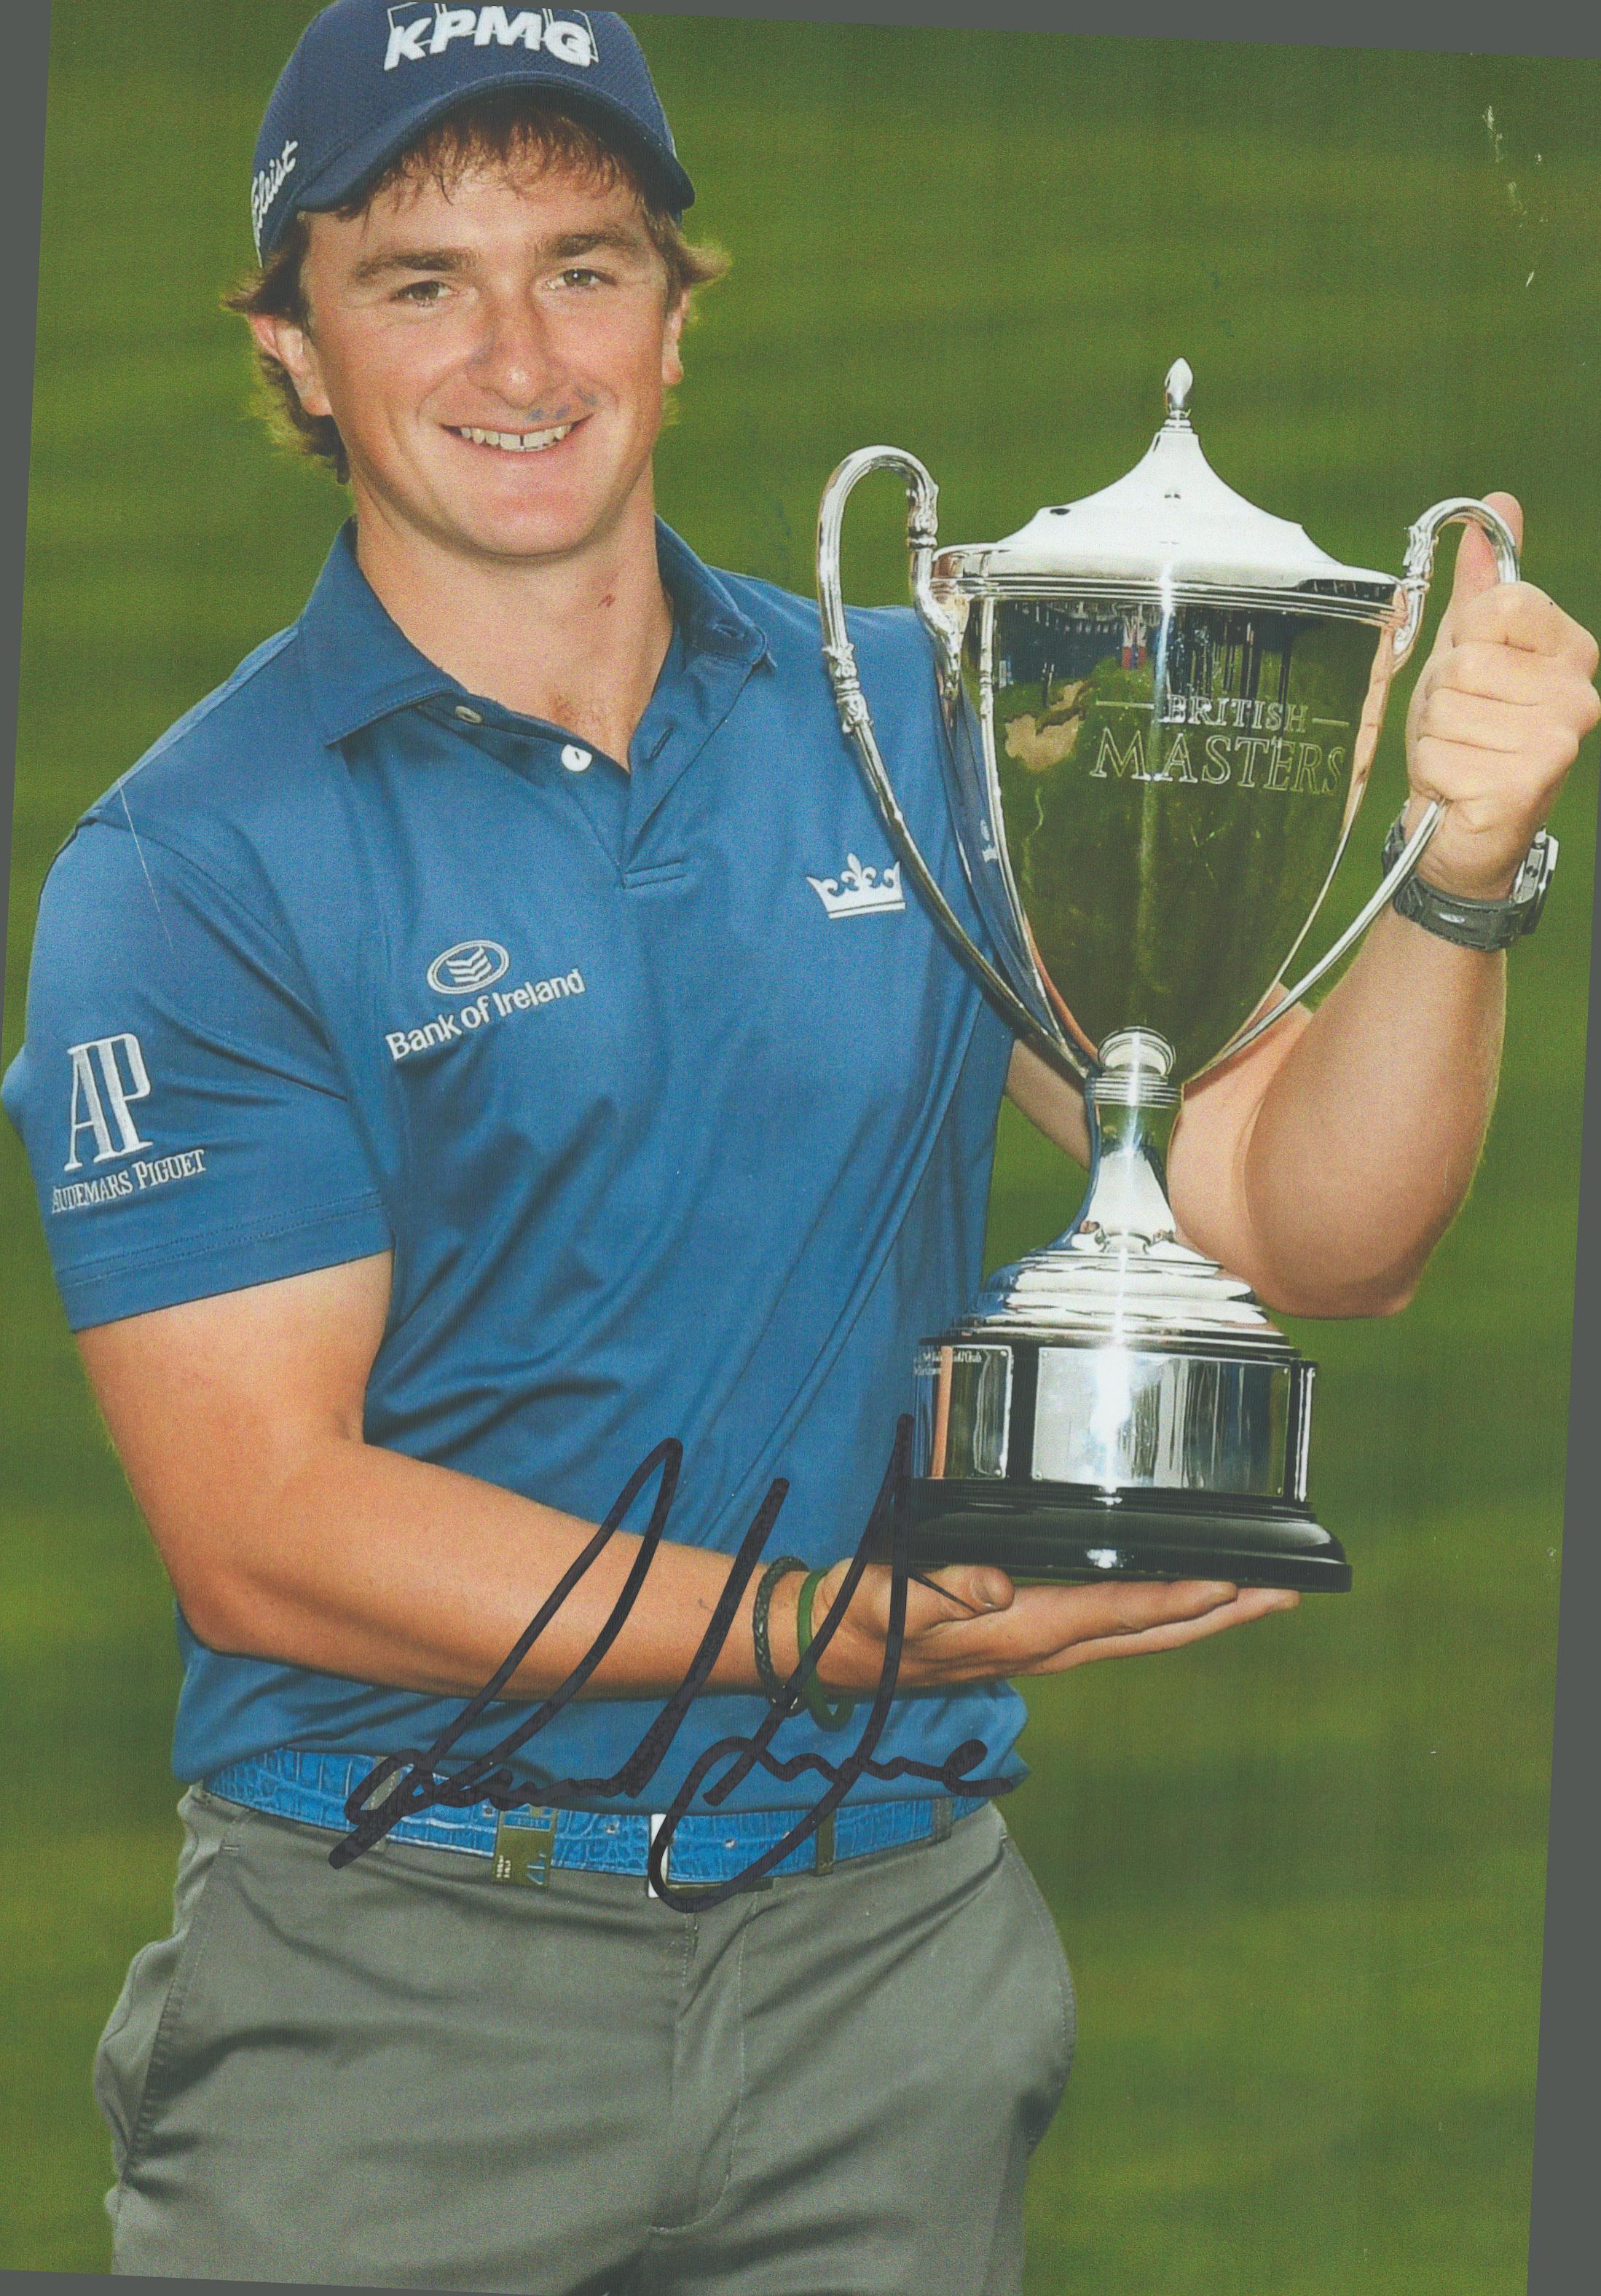 Golf Paul Dunne Hand signed 12x8 Colour Photo Showing Dunne with the British Masters Trophy. Good